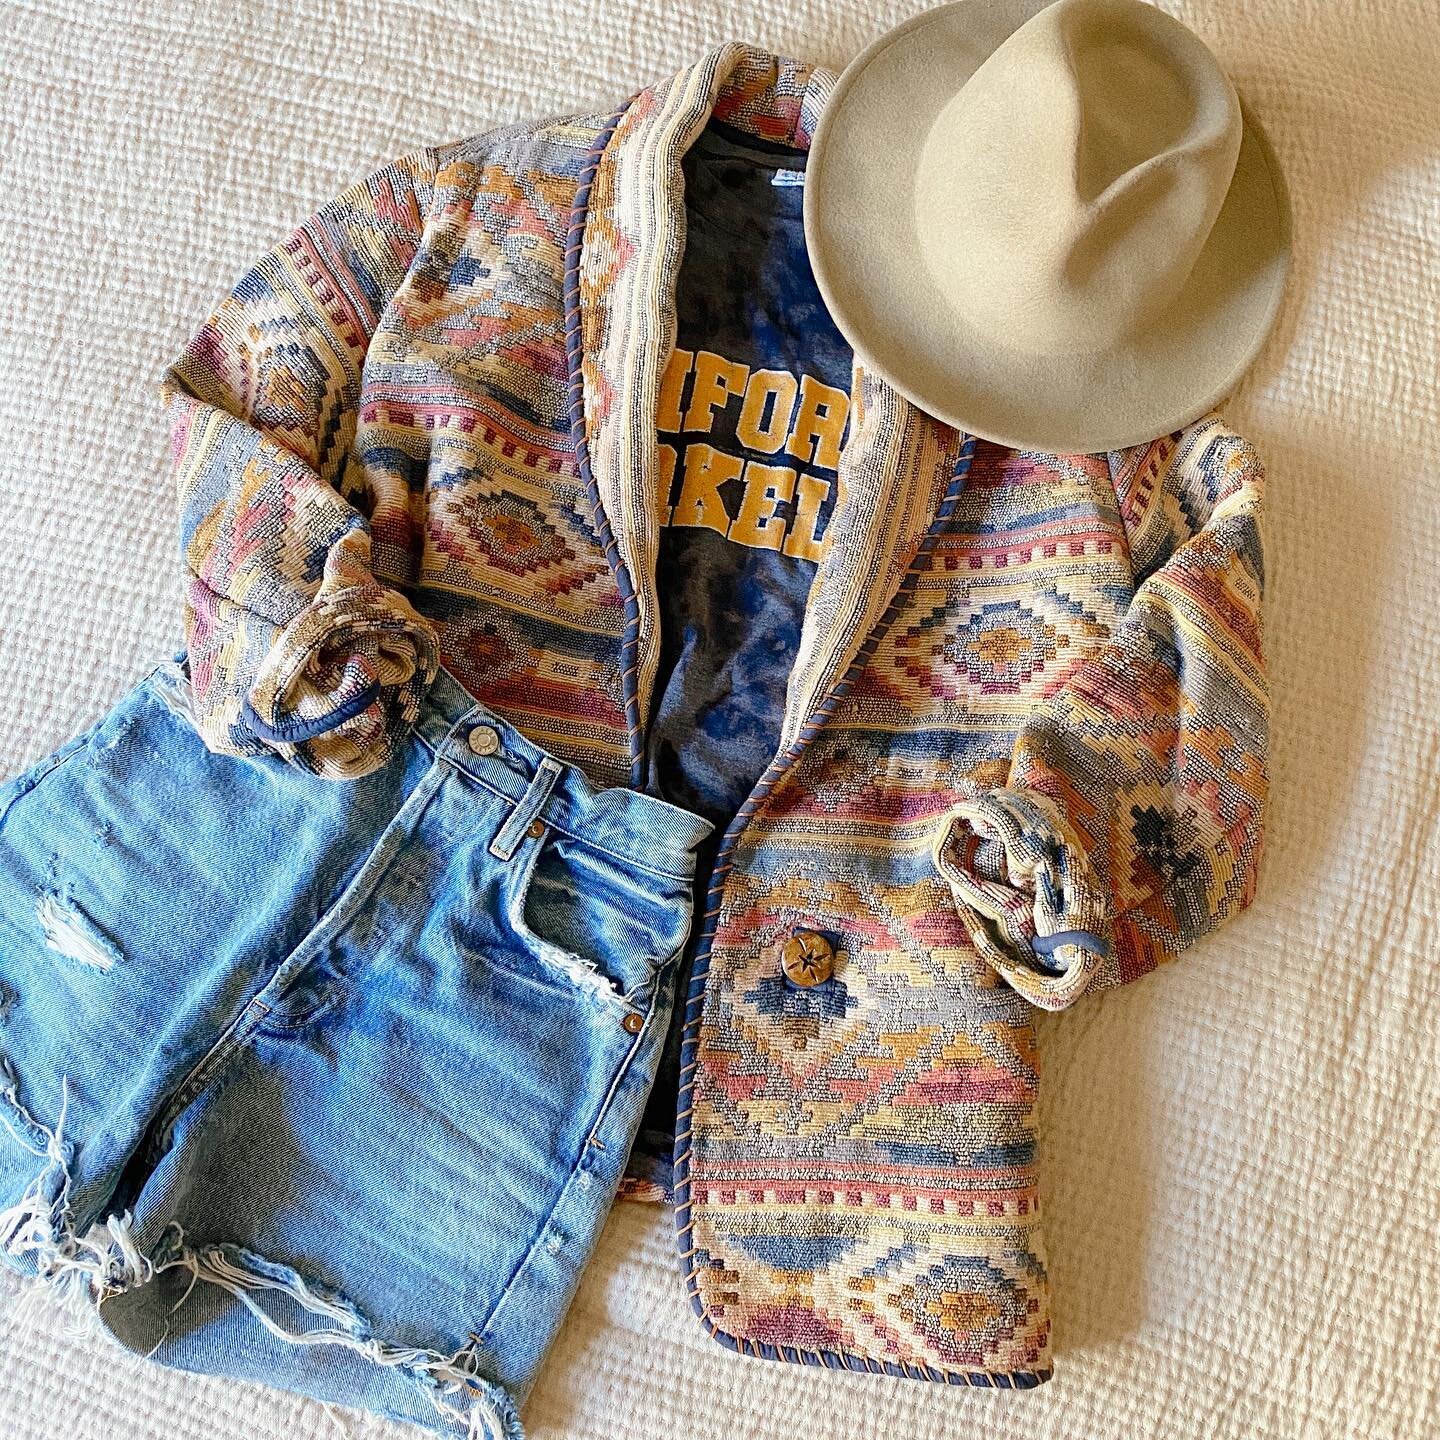 when it feels like summer but you're ready for fall 🍂 #taptoshop this fun 80s tapestry jacket and Berkeley tee 〰️